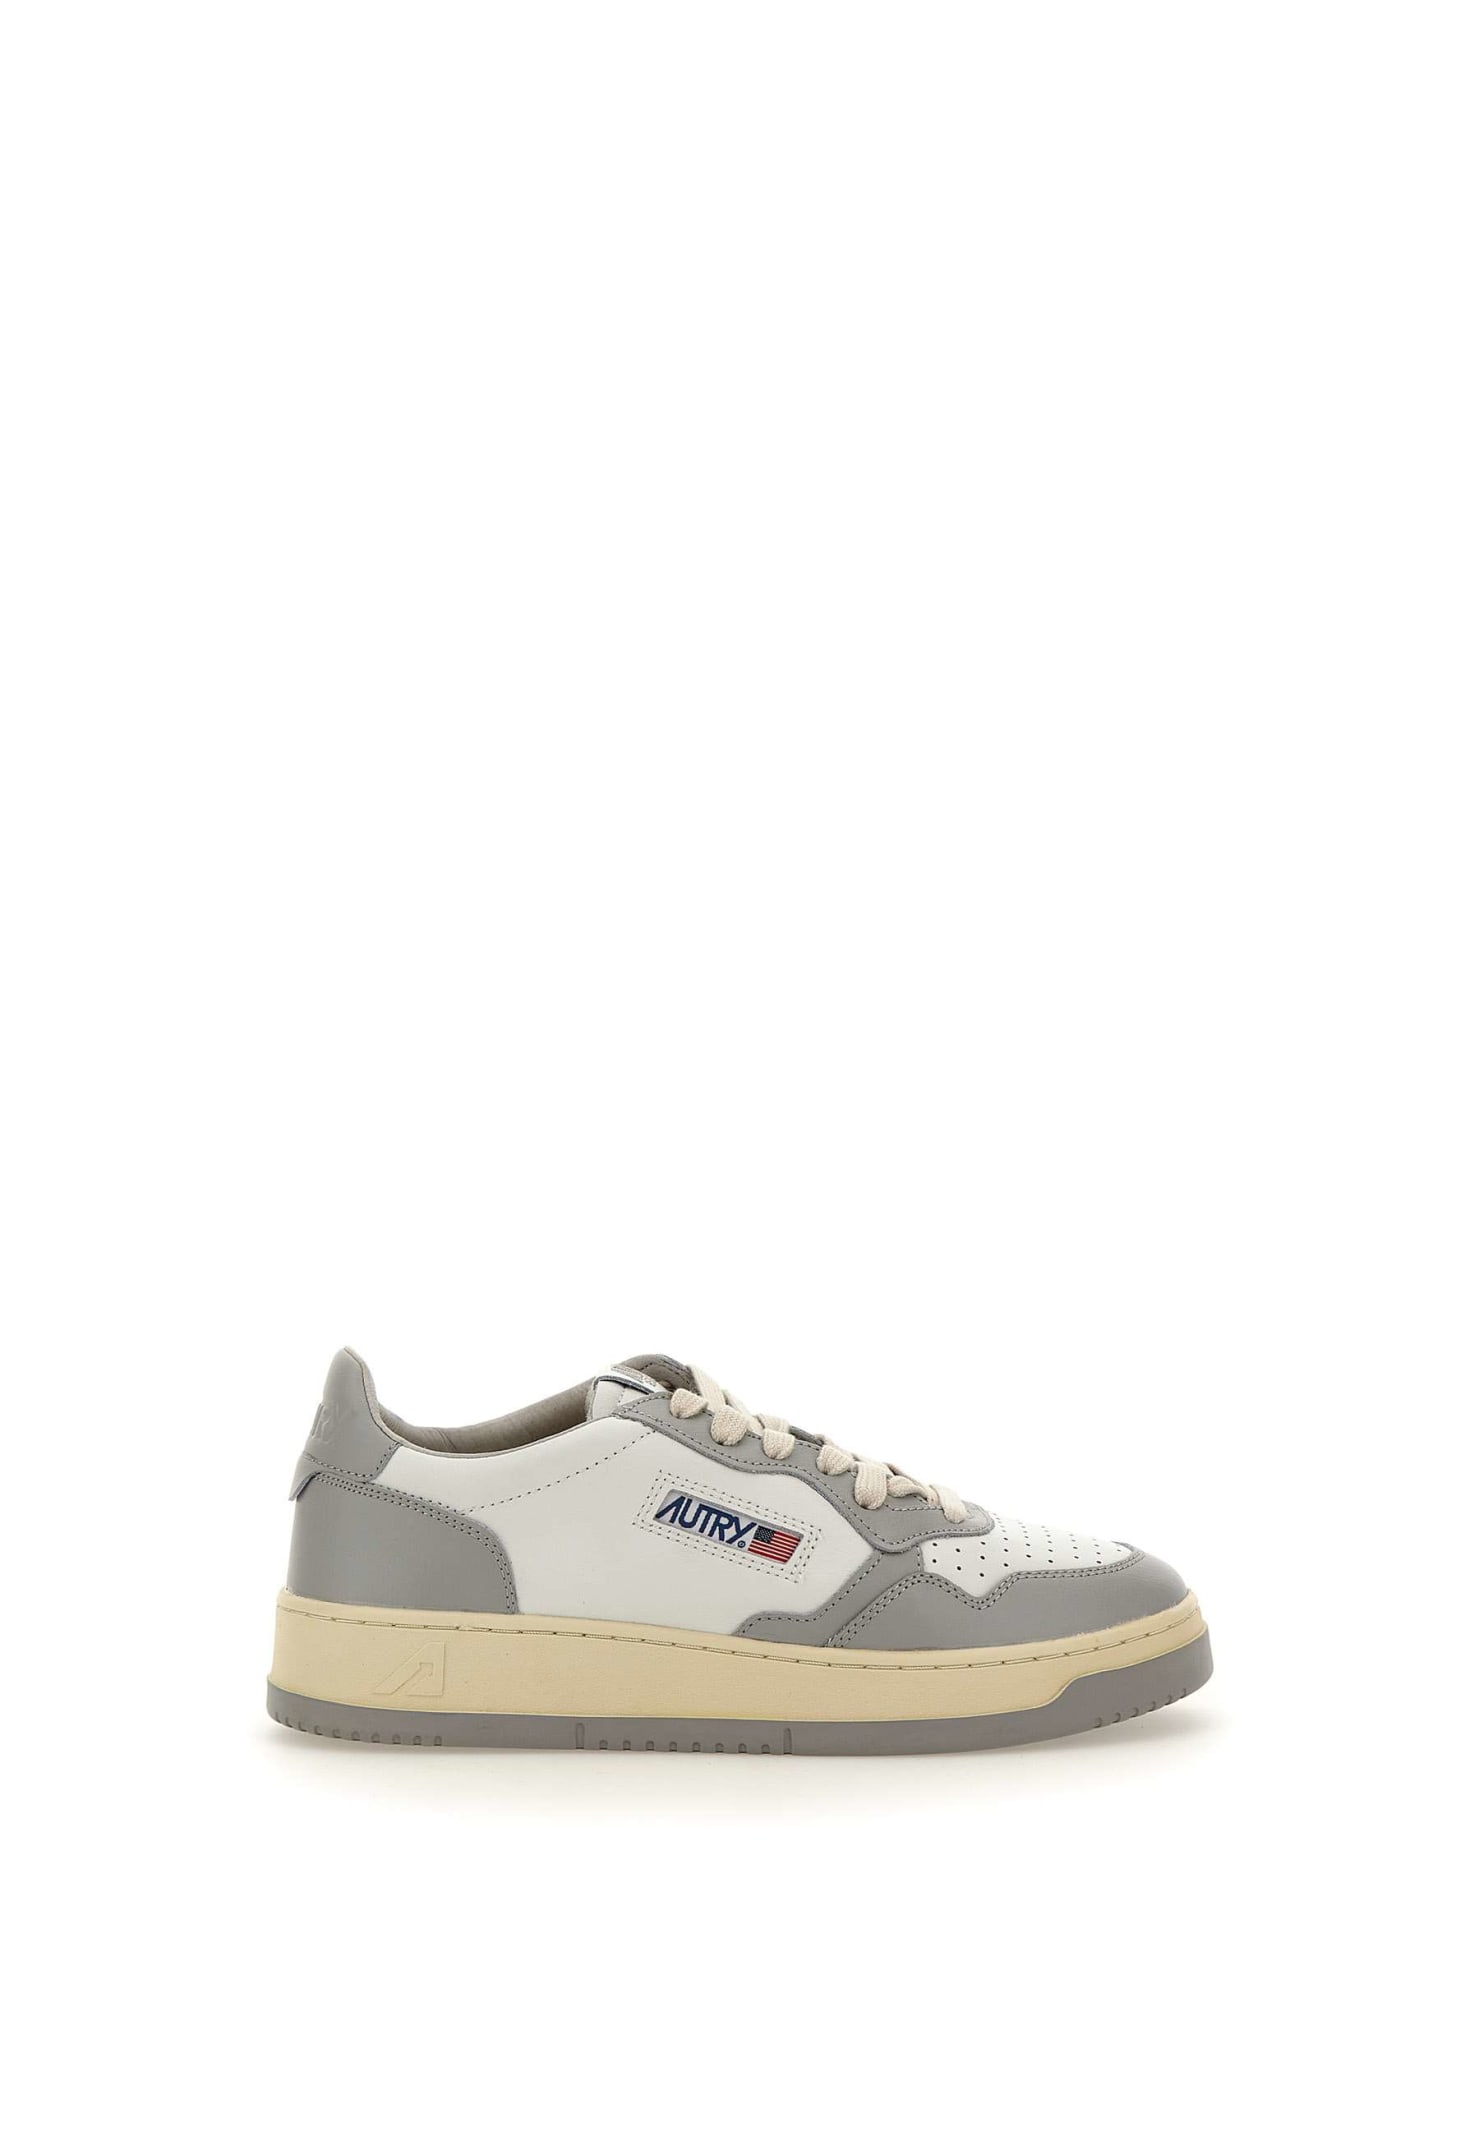 Autry Wb10 Leather Sneakers In White/grey